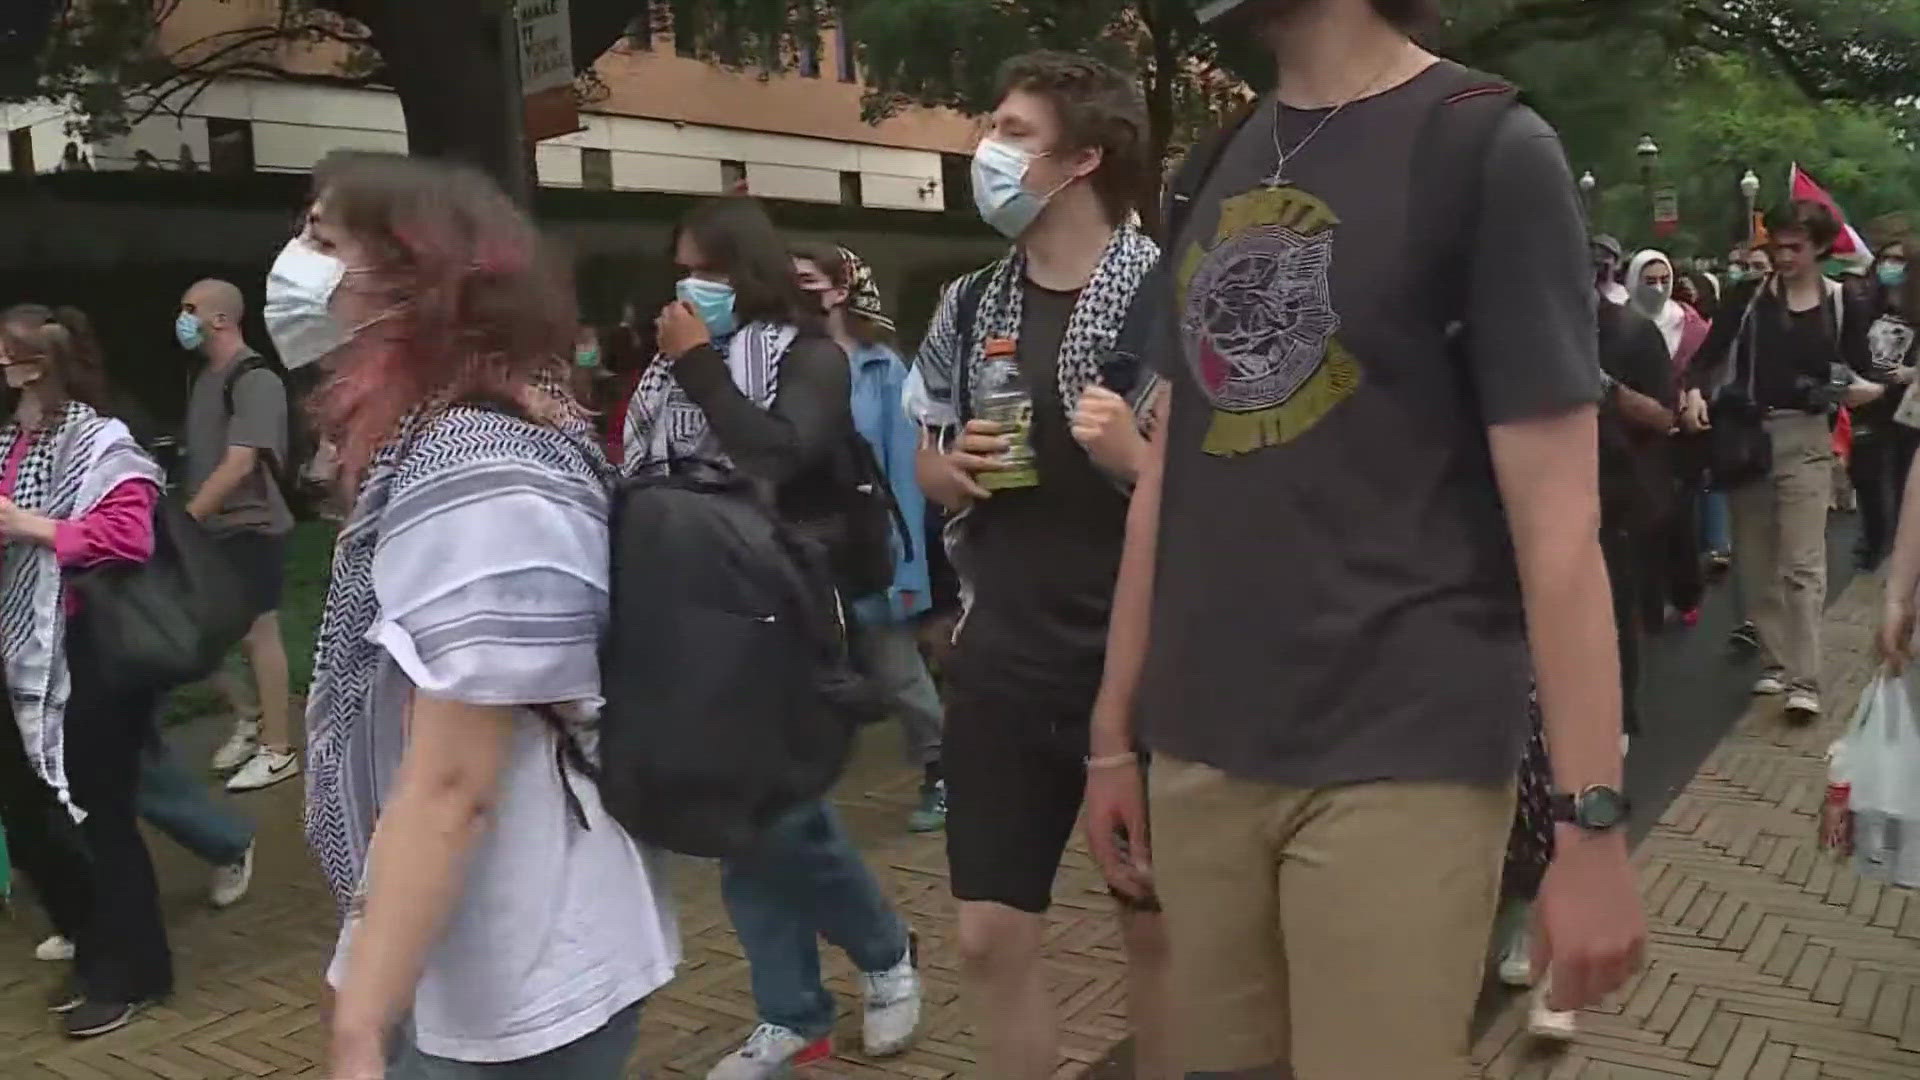 Demonstrations have become tense at some schools, with hundreds of students being arrested.